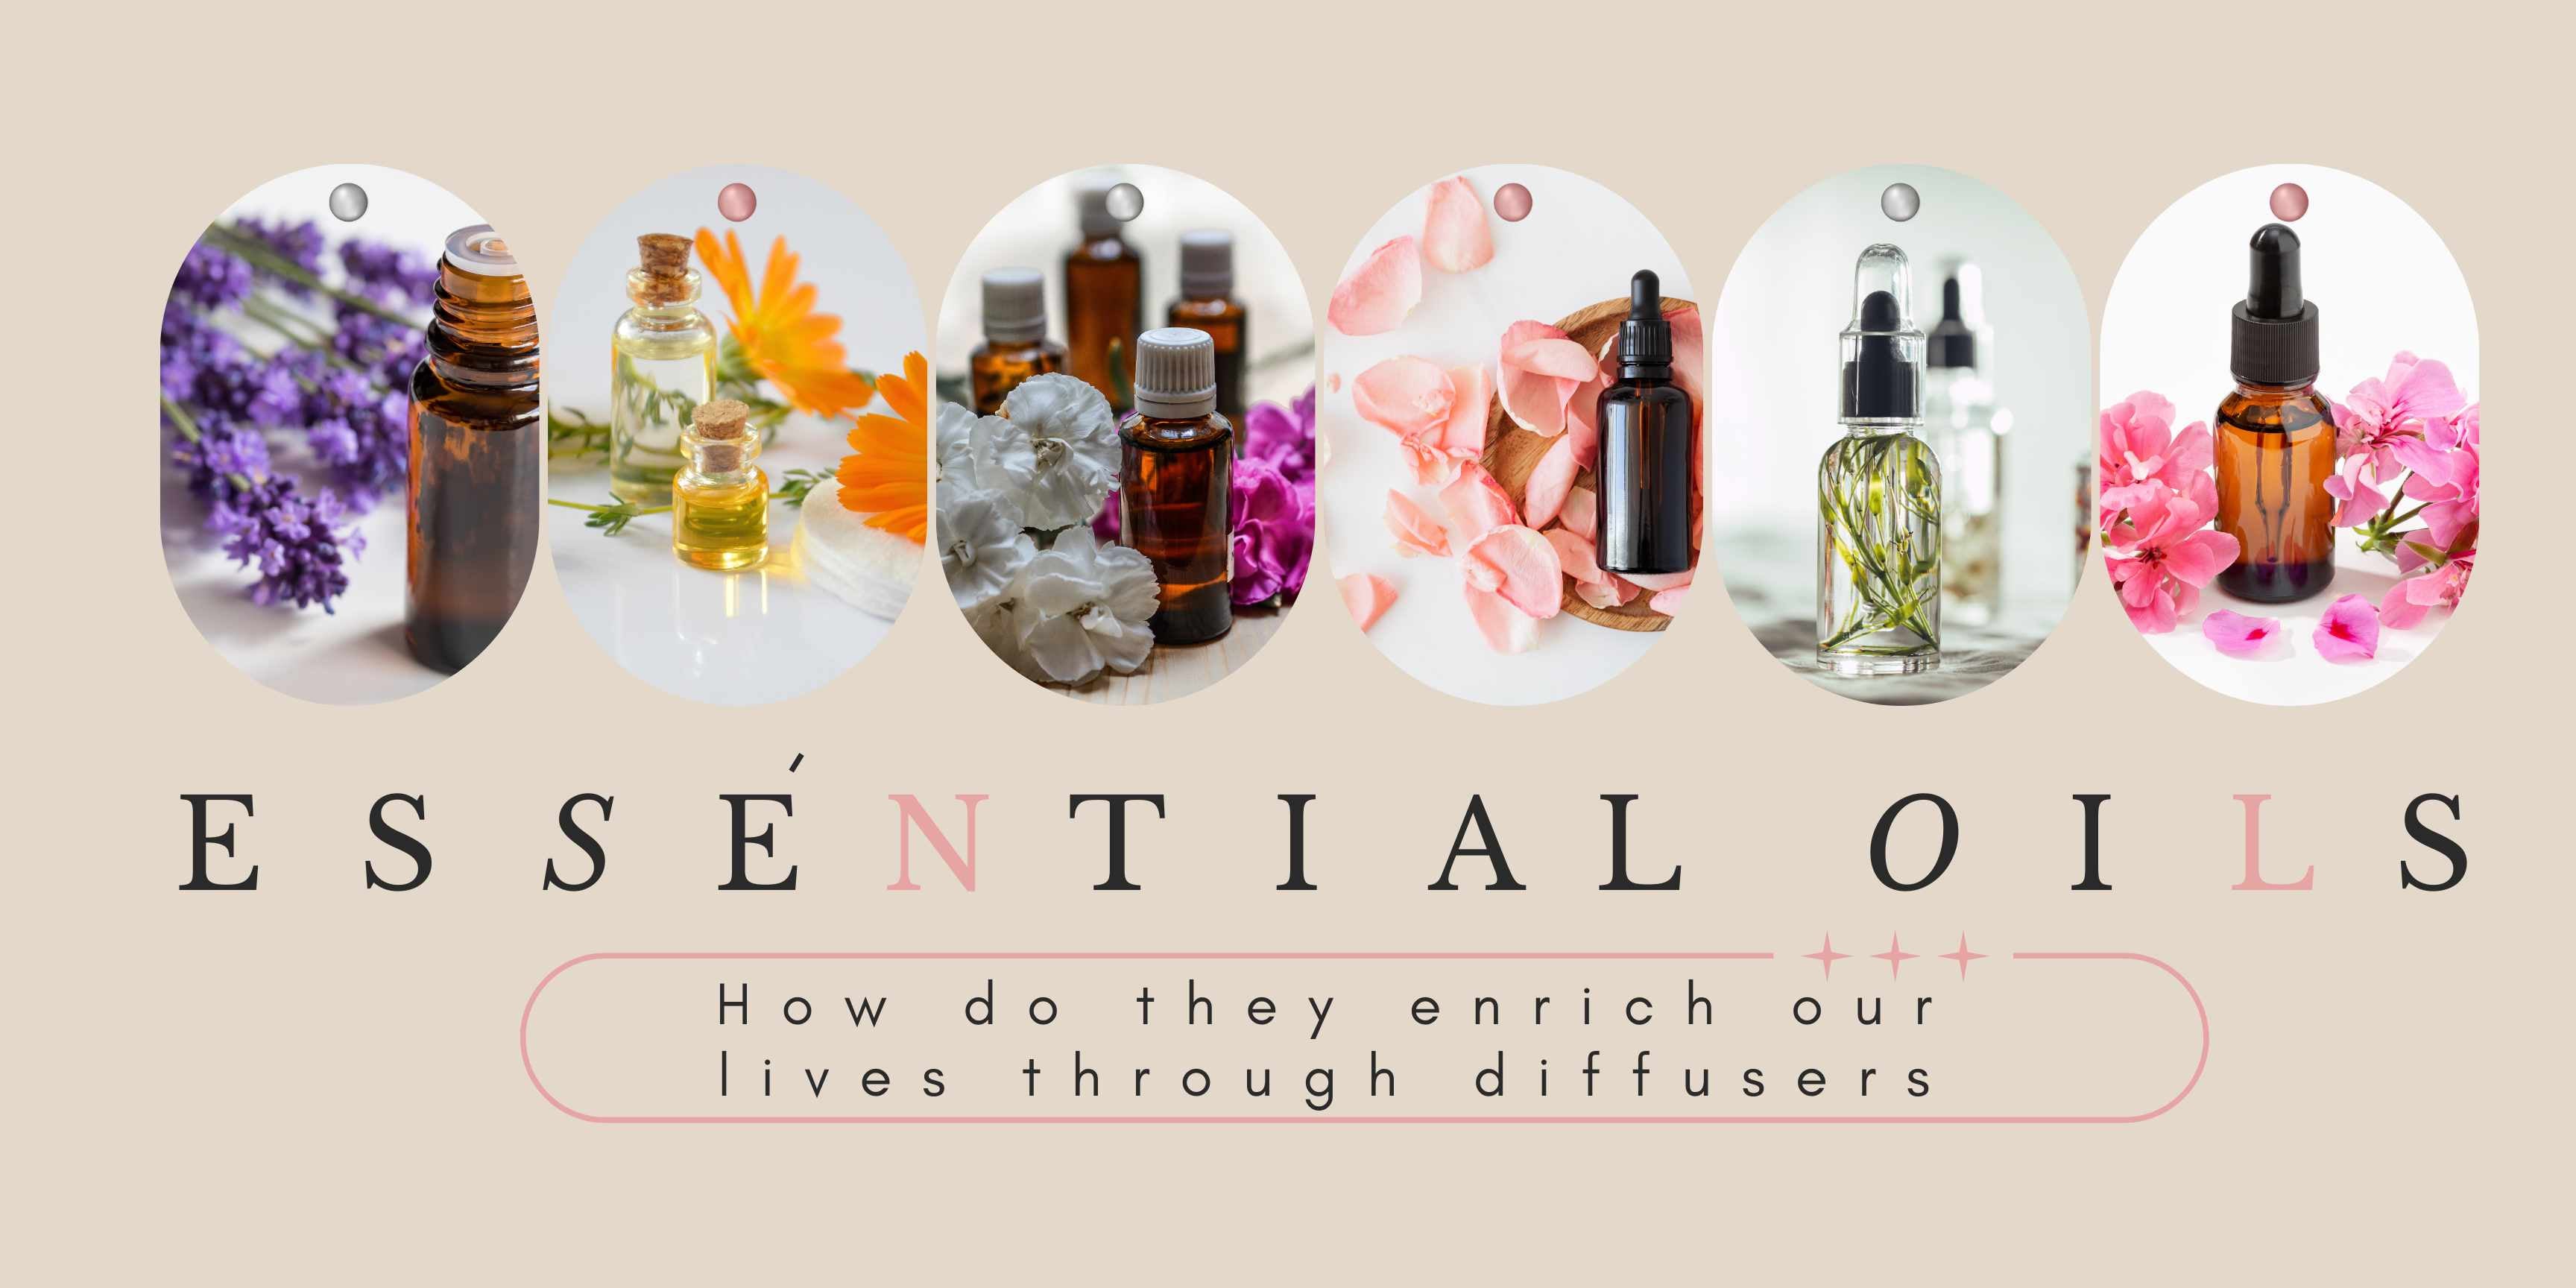 Q&A - Can You Cook with Essential Oils? - Citrus and Allied